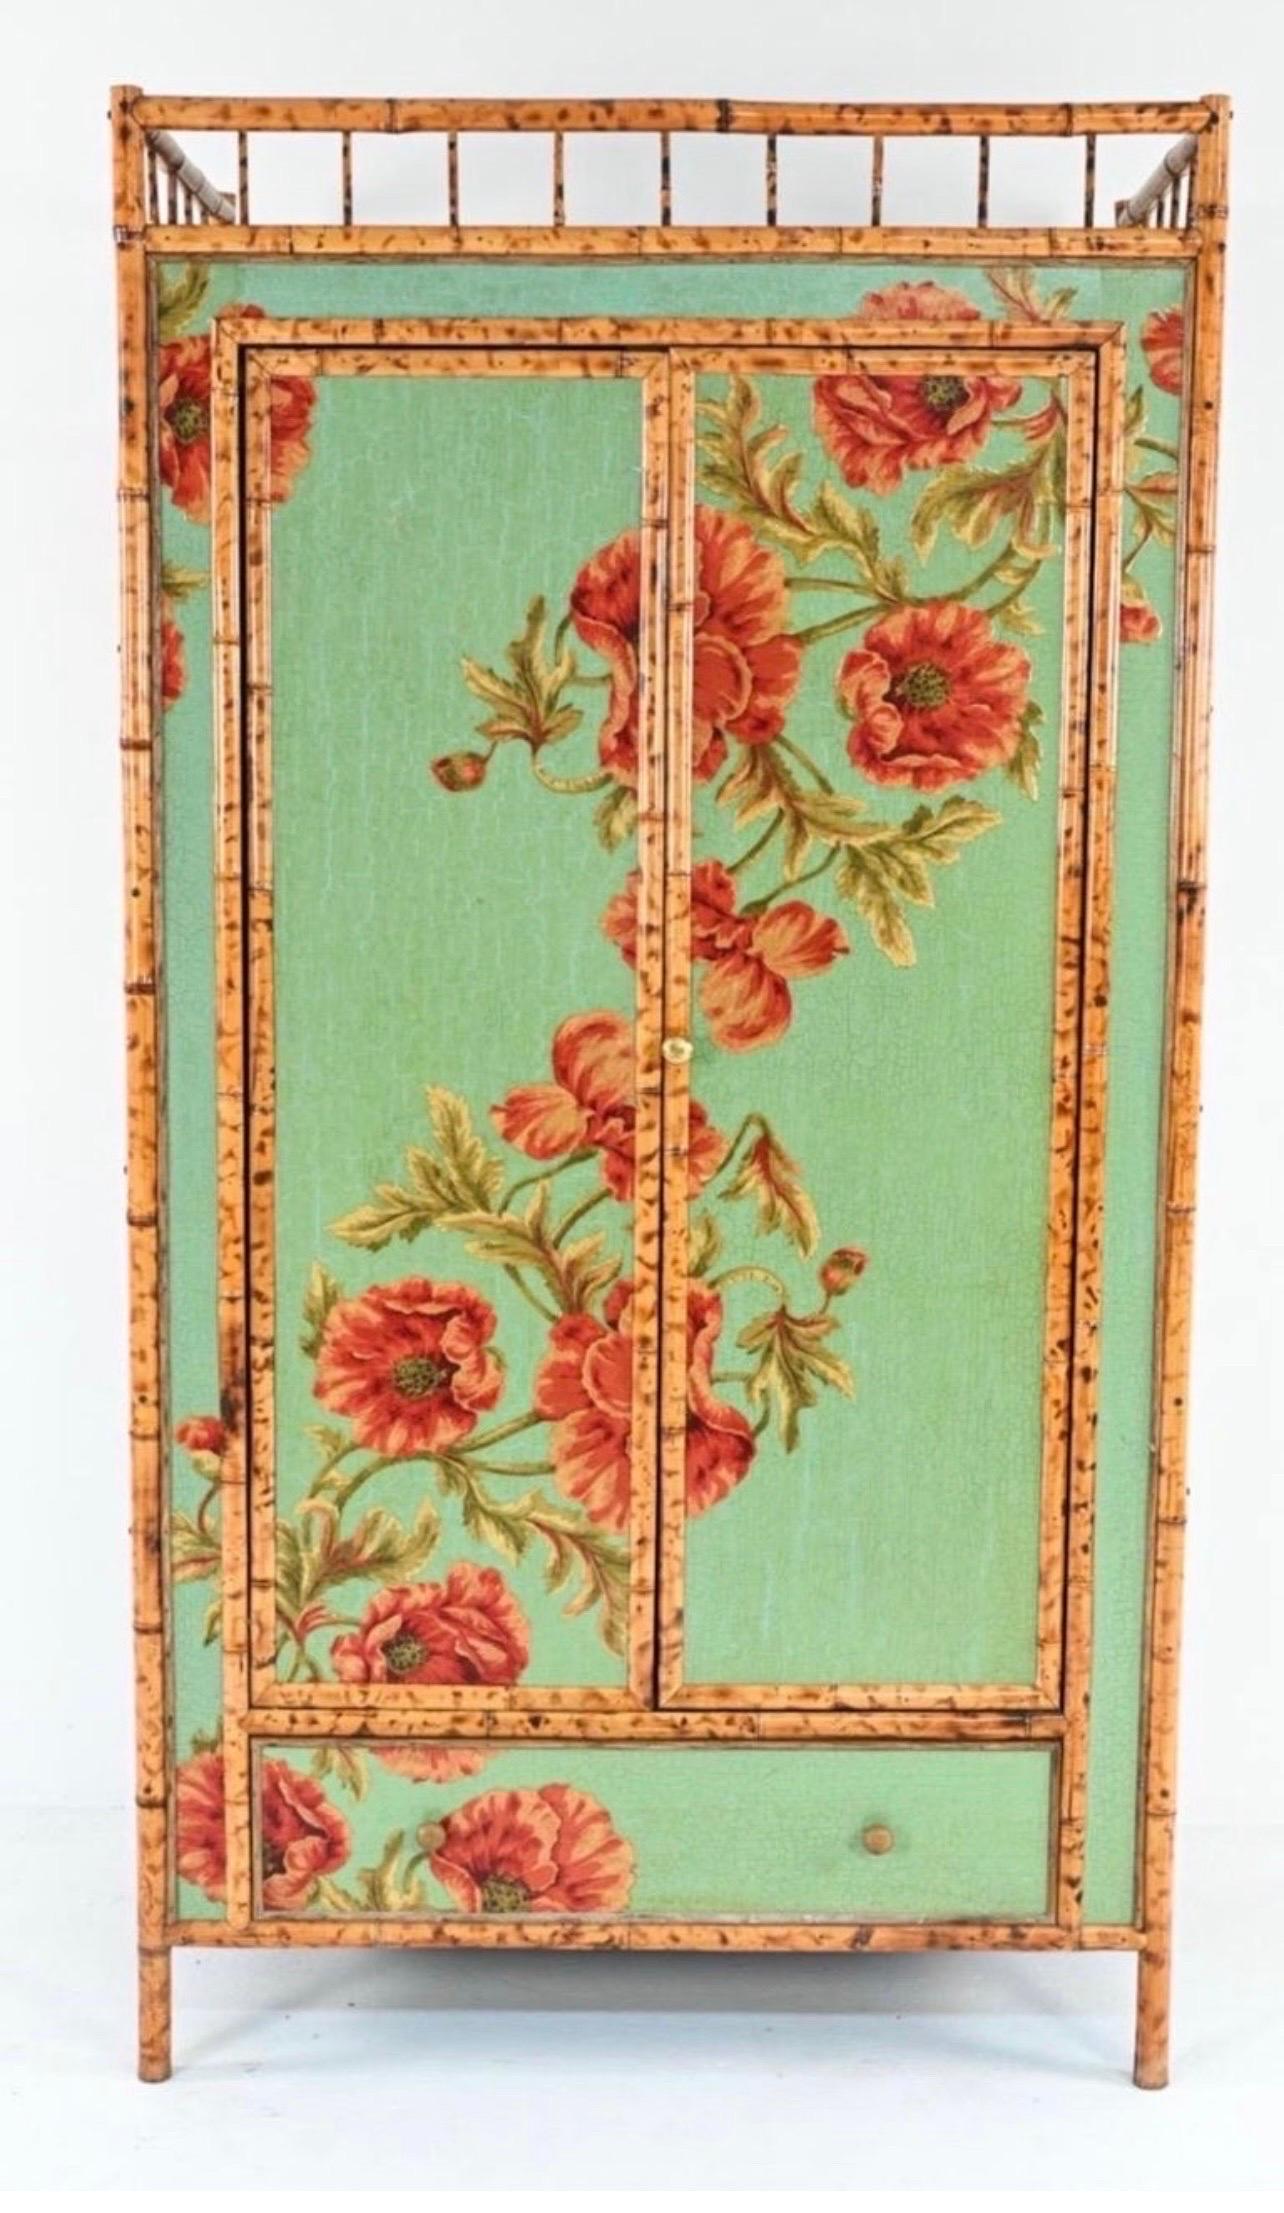 Rare and magnificent chinoiserie cabinet in the aesthetic style decorated with decoupaged floral fabric over teal crackle paint and trimmed in tortoiseshell bamboo. Why not own the best.